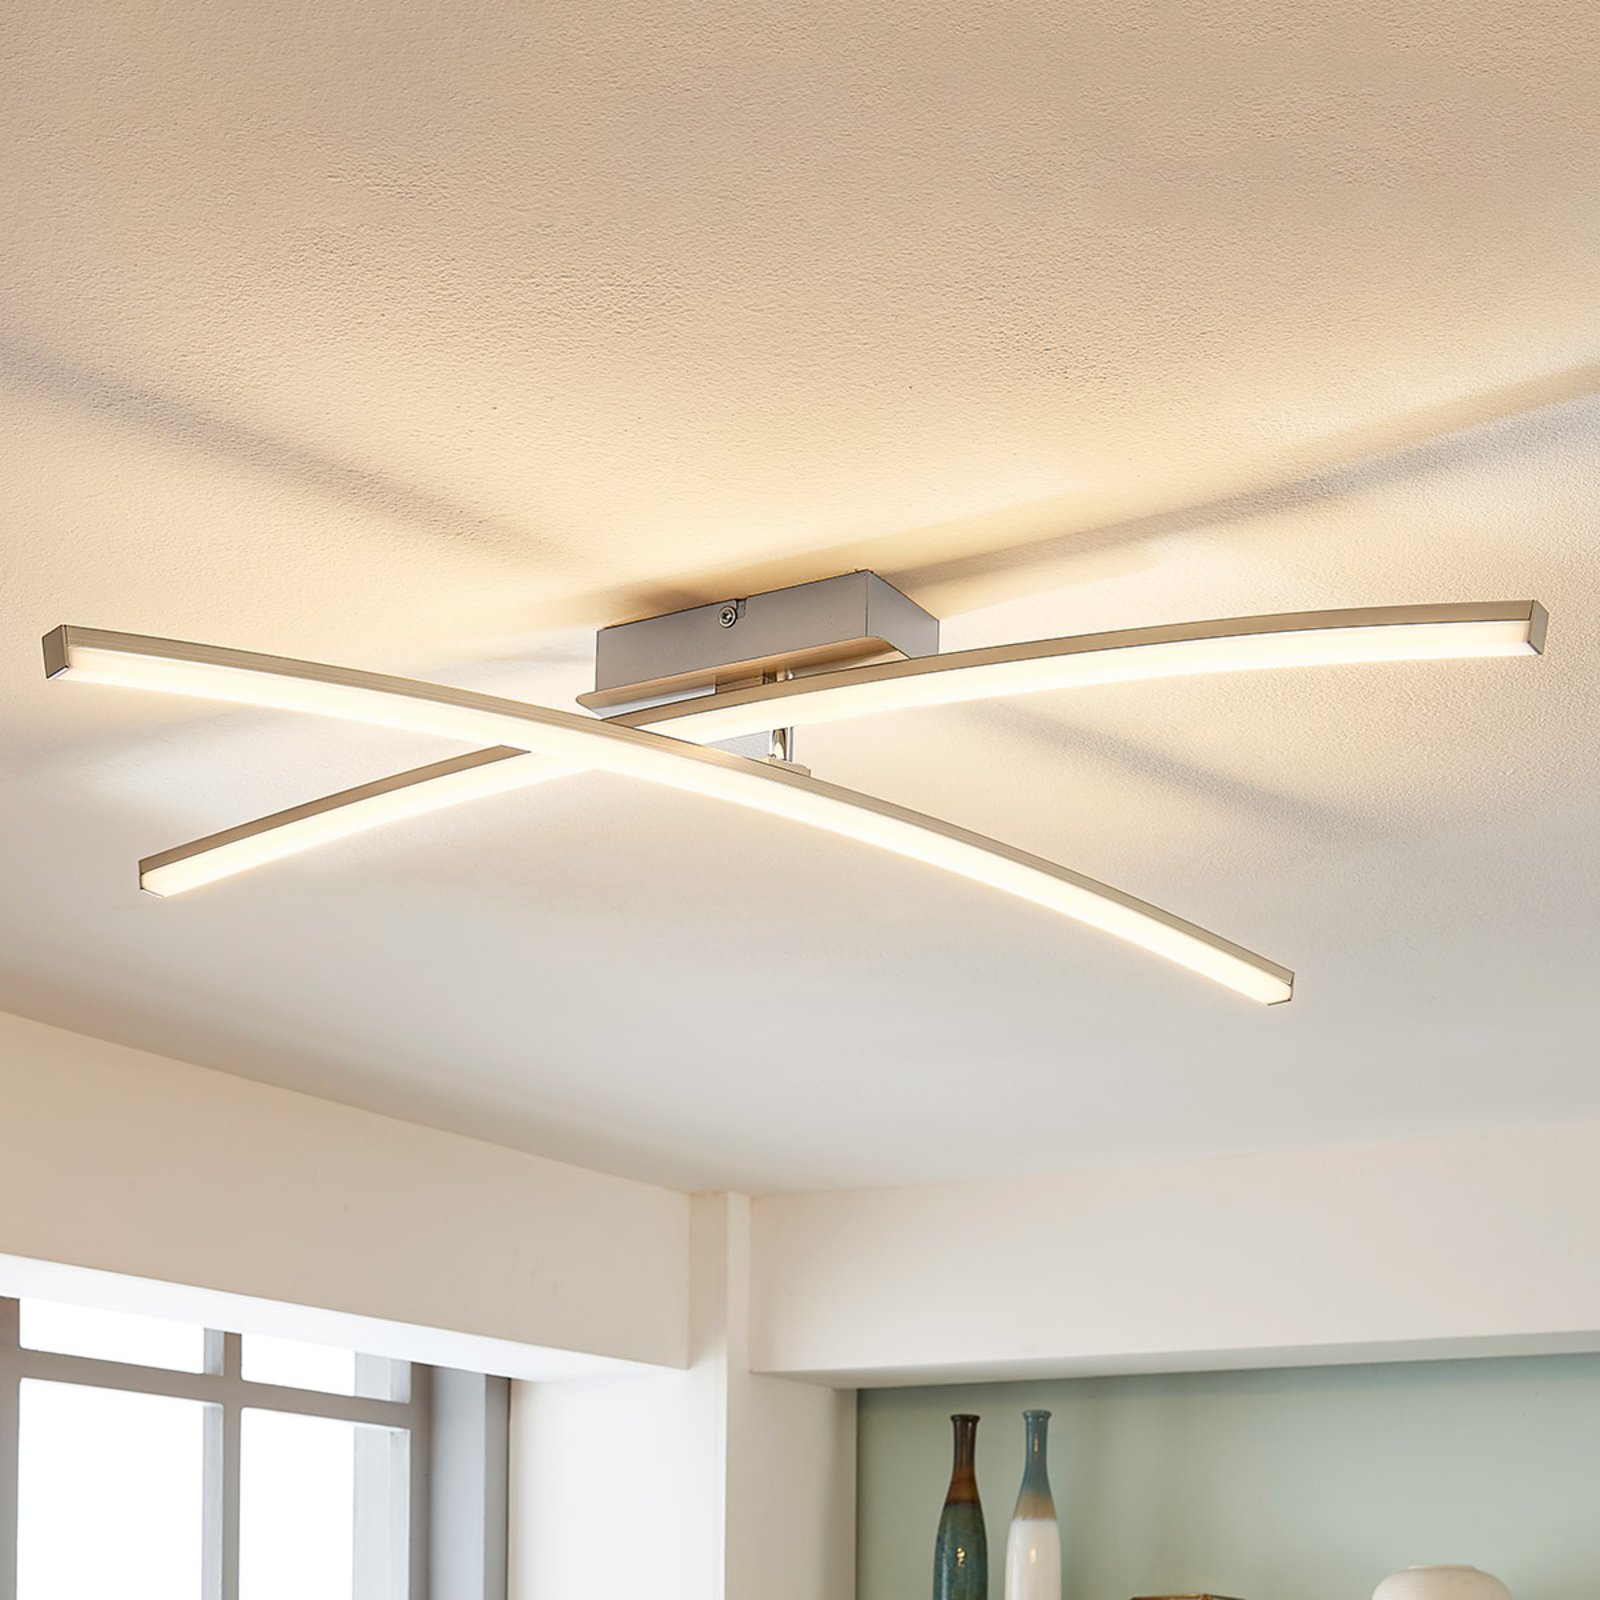 Laurenzia - LED ceiling light, dimmable